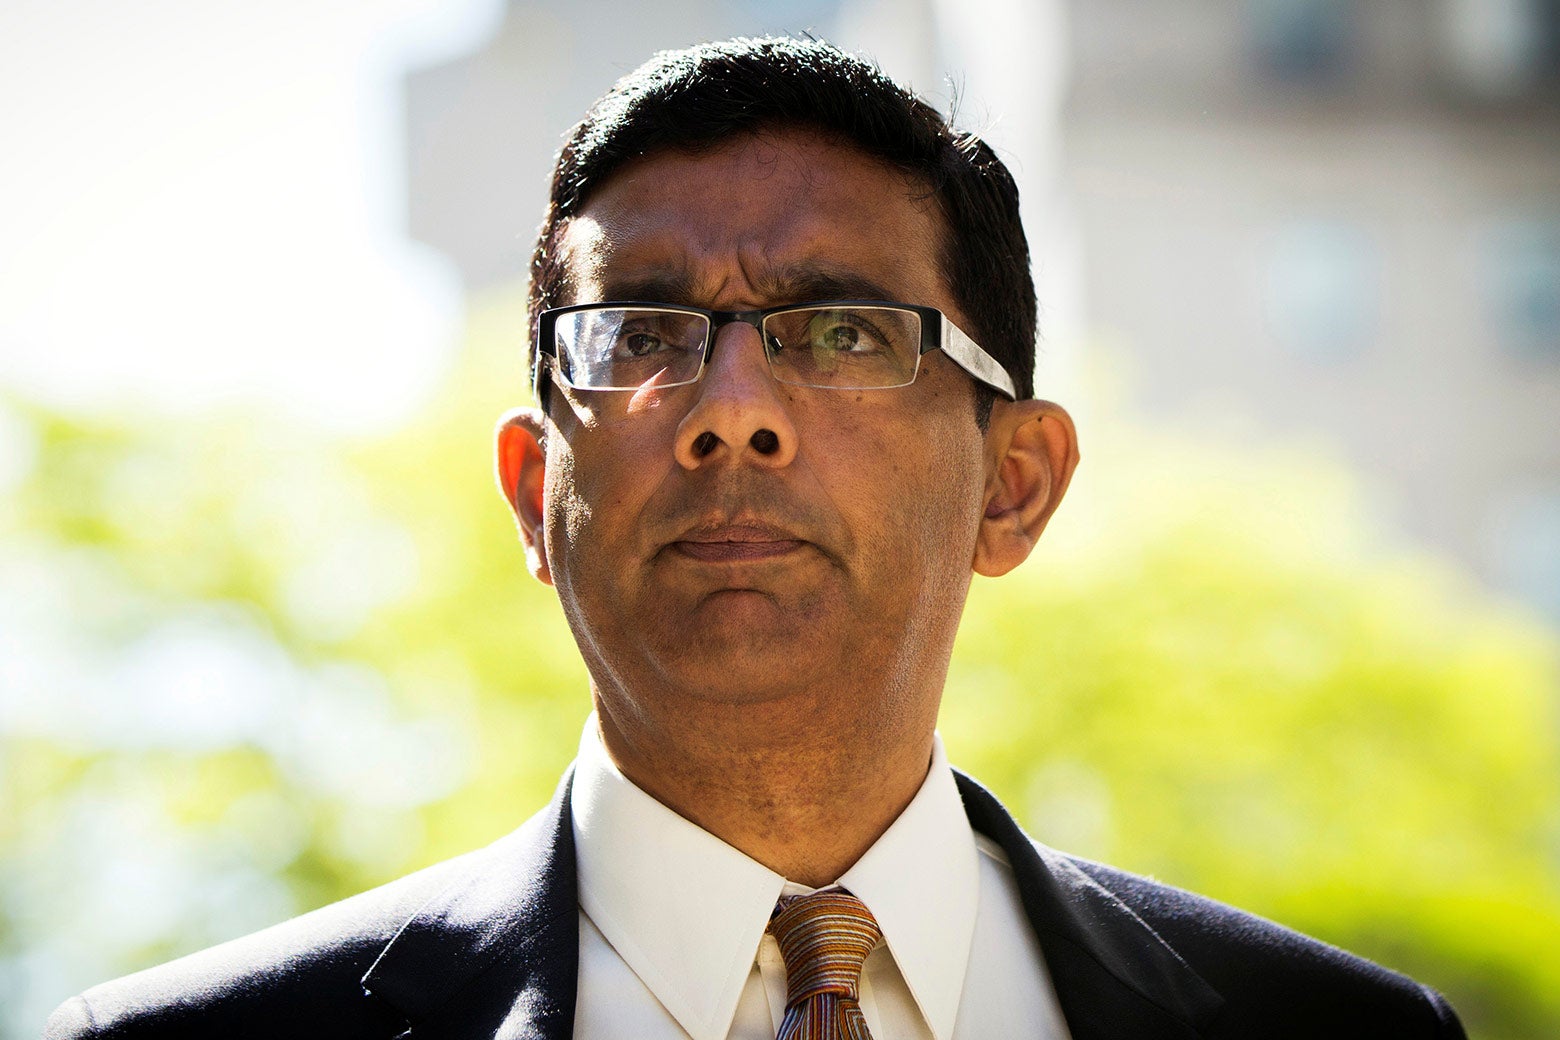 Conservative commentator and best-selling author Dinesh D’Souza exits the Manhattan Federal Courthouse after pleading guilty to campaign finance law violations in New York City on May 20, 2014.